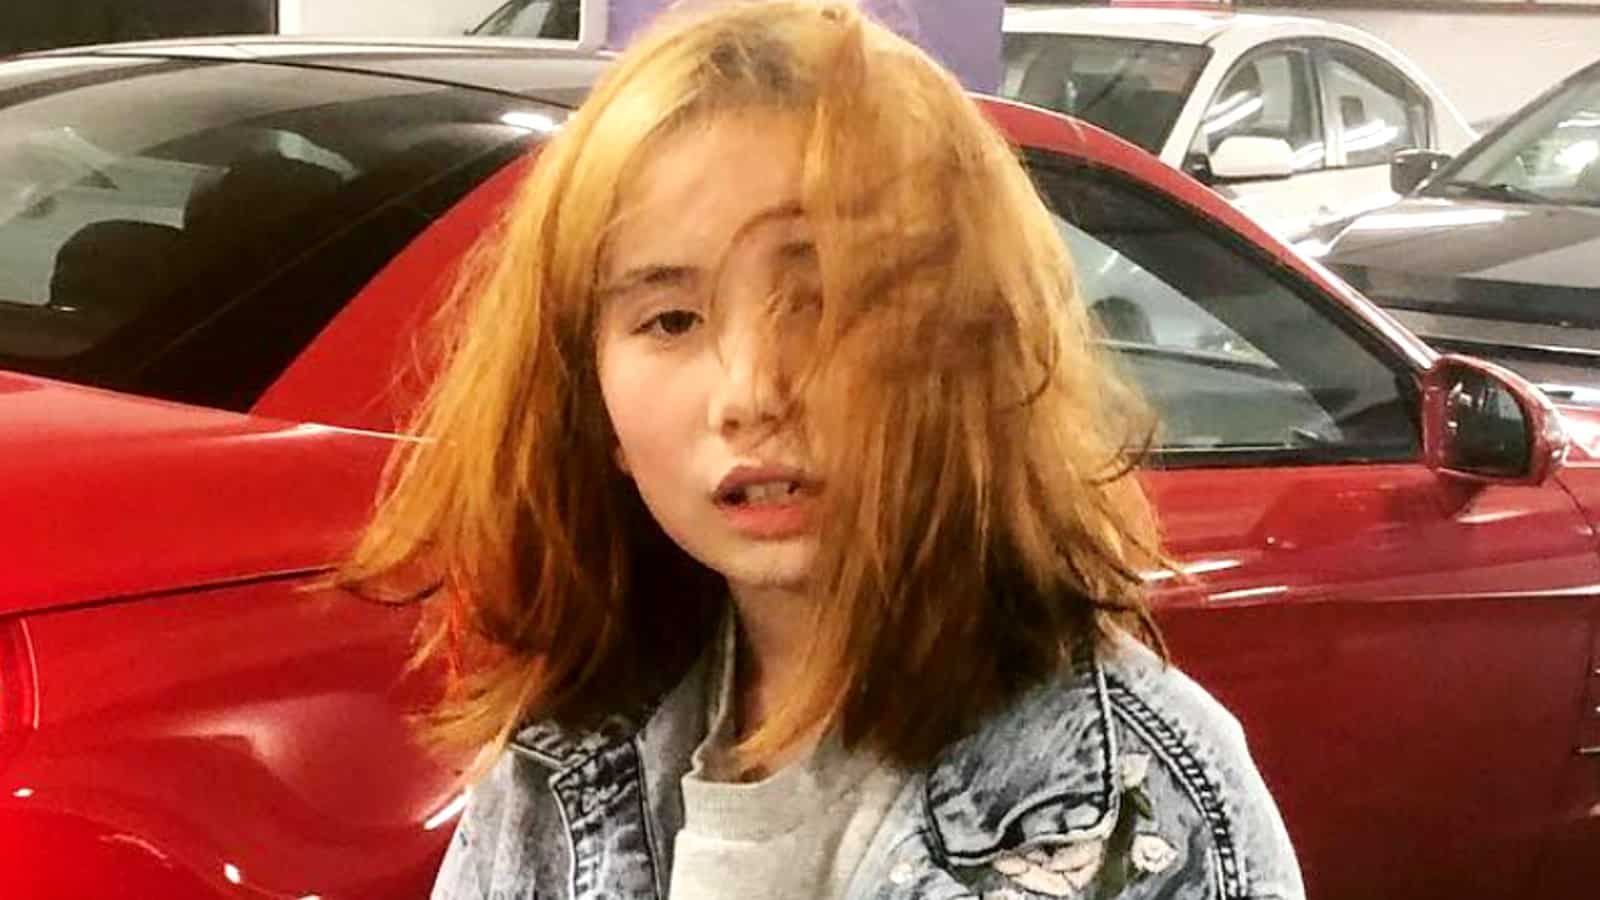 Lil Tay poses in front of a car